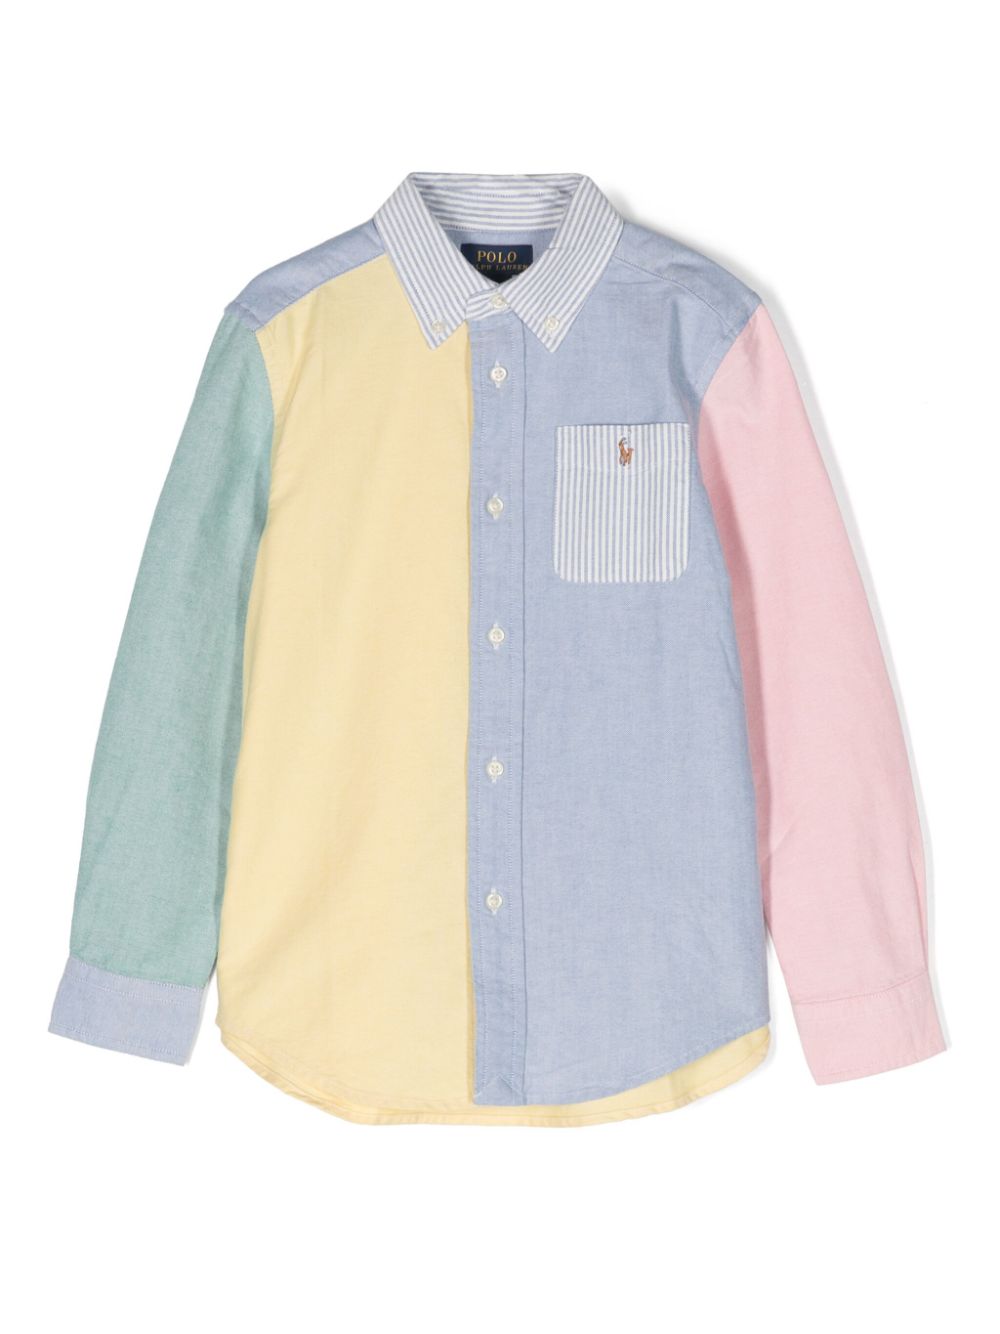 Multicolored shirt for boys with logo